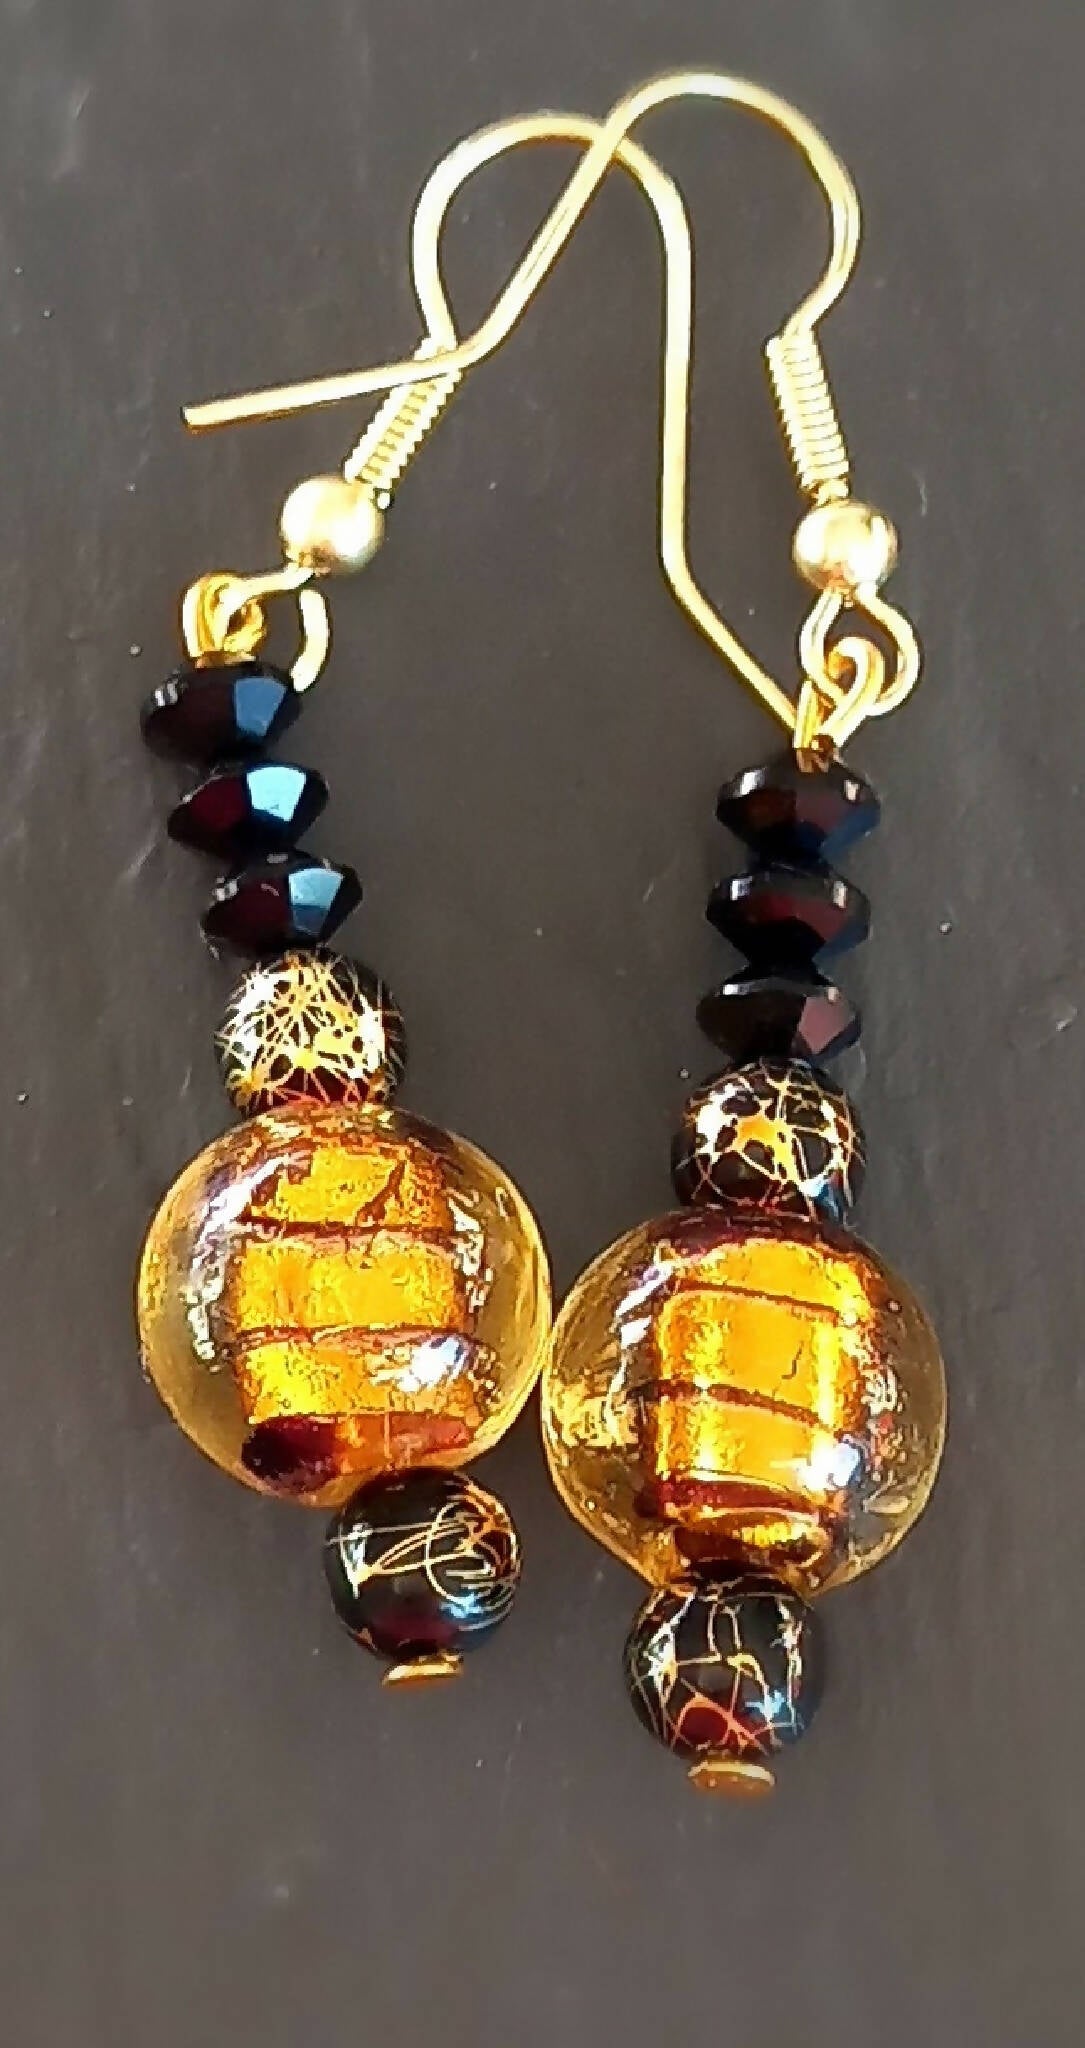 Earrings - Gold and Black Stripe Lampbeads with Crystals